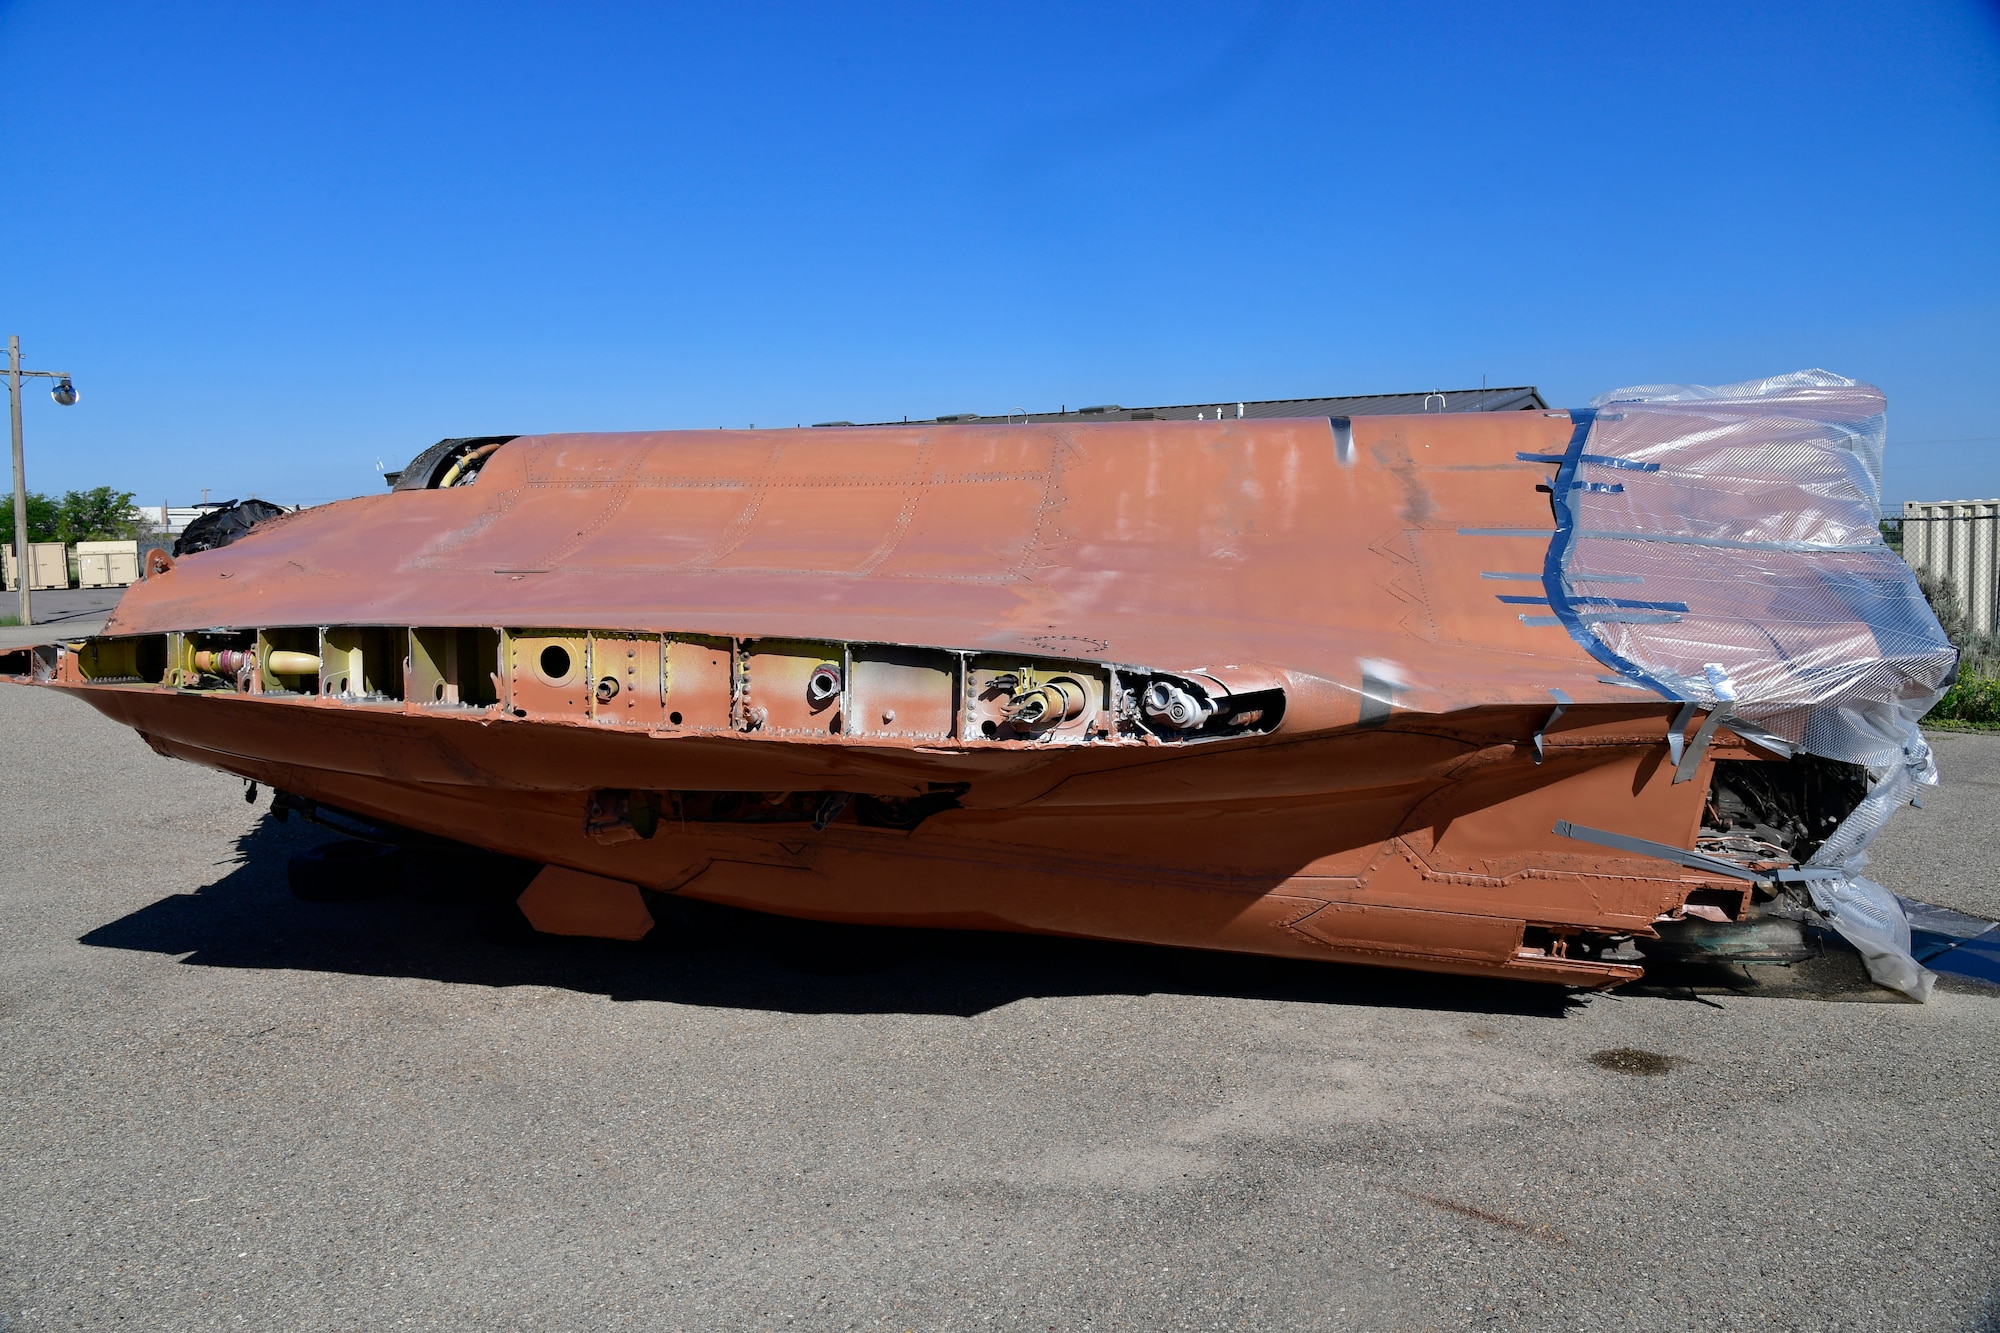 The fuselage of a condemned F-35A Lightning II Aug. 23, 2021, at Hill Air Force Base, Utah, that has been decontaminated, painted and made safe for further handling. The aircraft was involved in a landing mishap in 2020 at Eglin AFB, Florida, but is now being transformed into sectional training aids by Airmen at Hill AFB for use during instruction of F-35 maintainers. (U.S. Air Force photo by Todd Cromar)